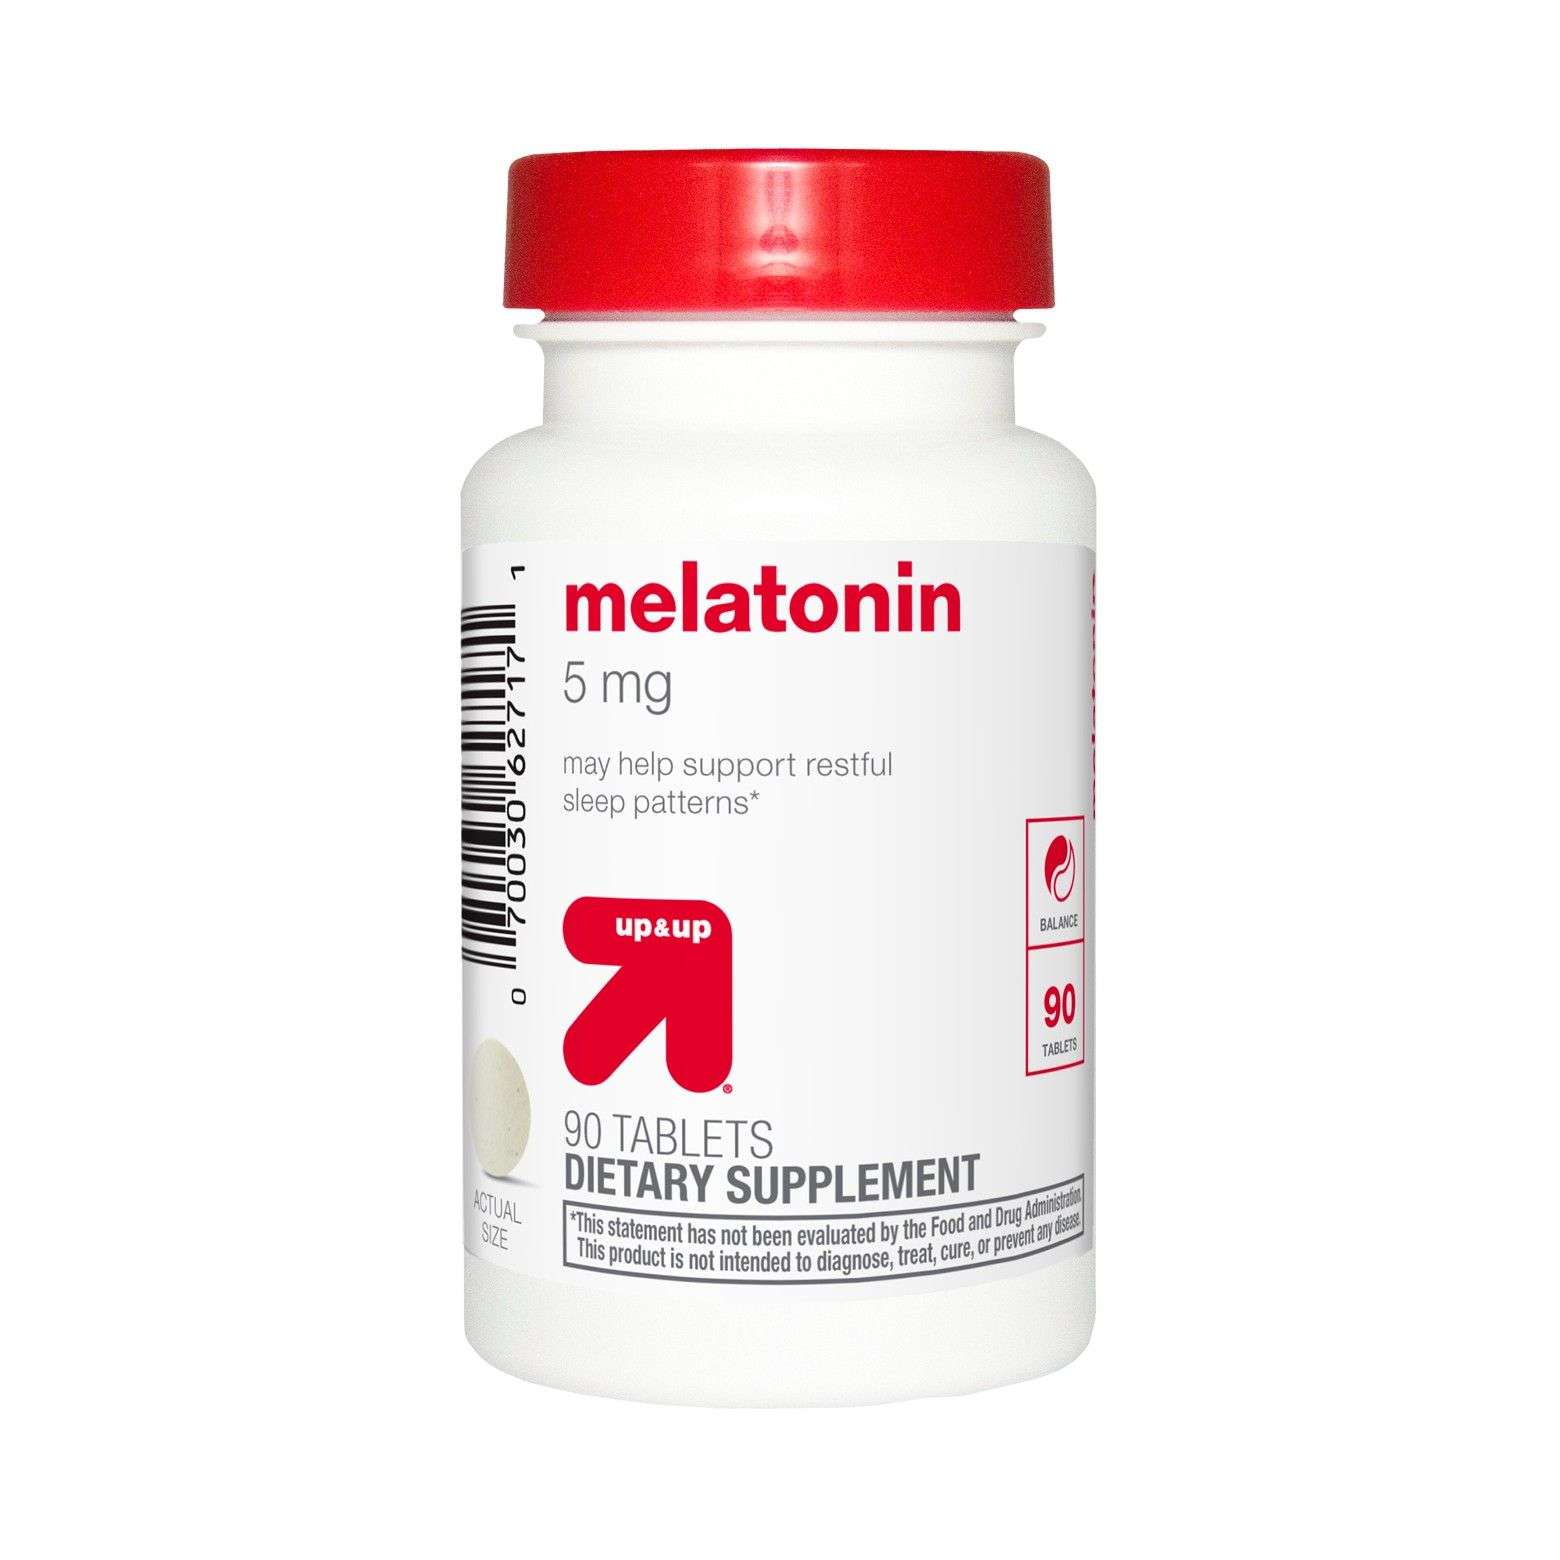 How Much Melatonin Can You Take In 24 Hours